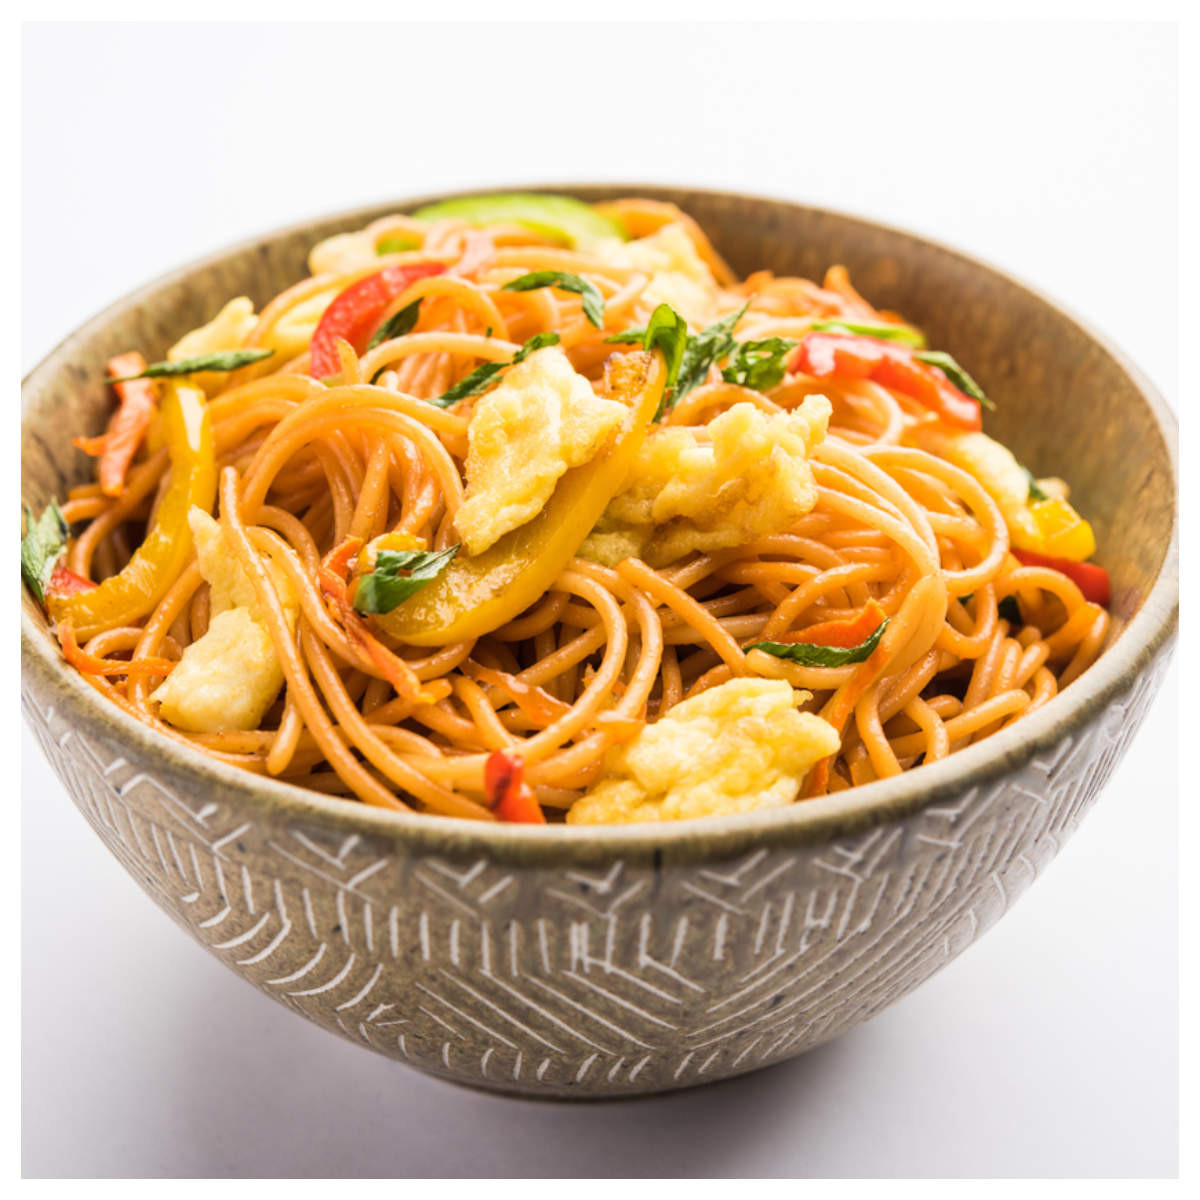 20 Best Recipes with Egg Noodles - Best Recipes Ideas and Collections